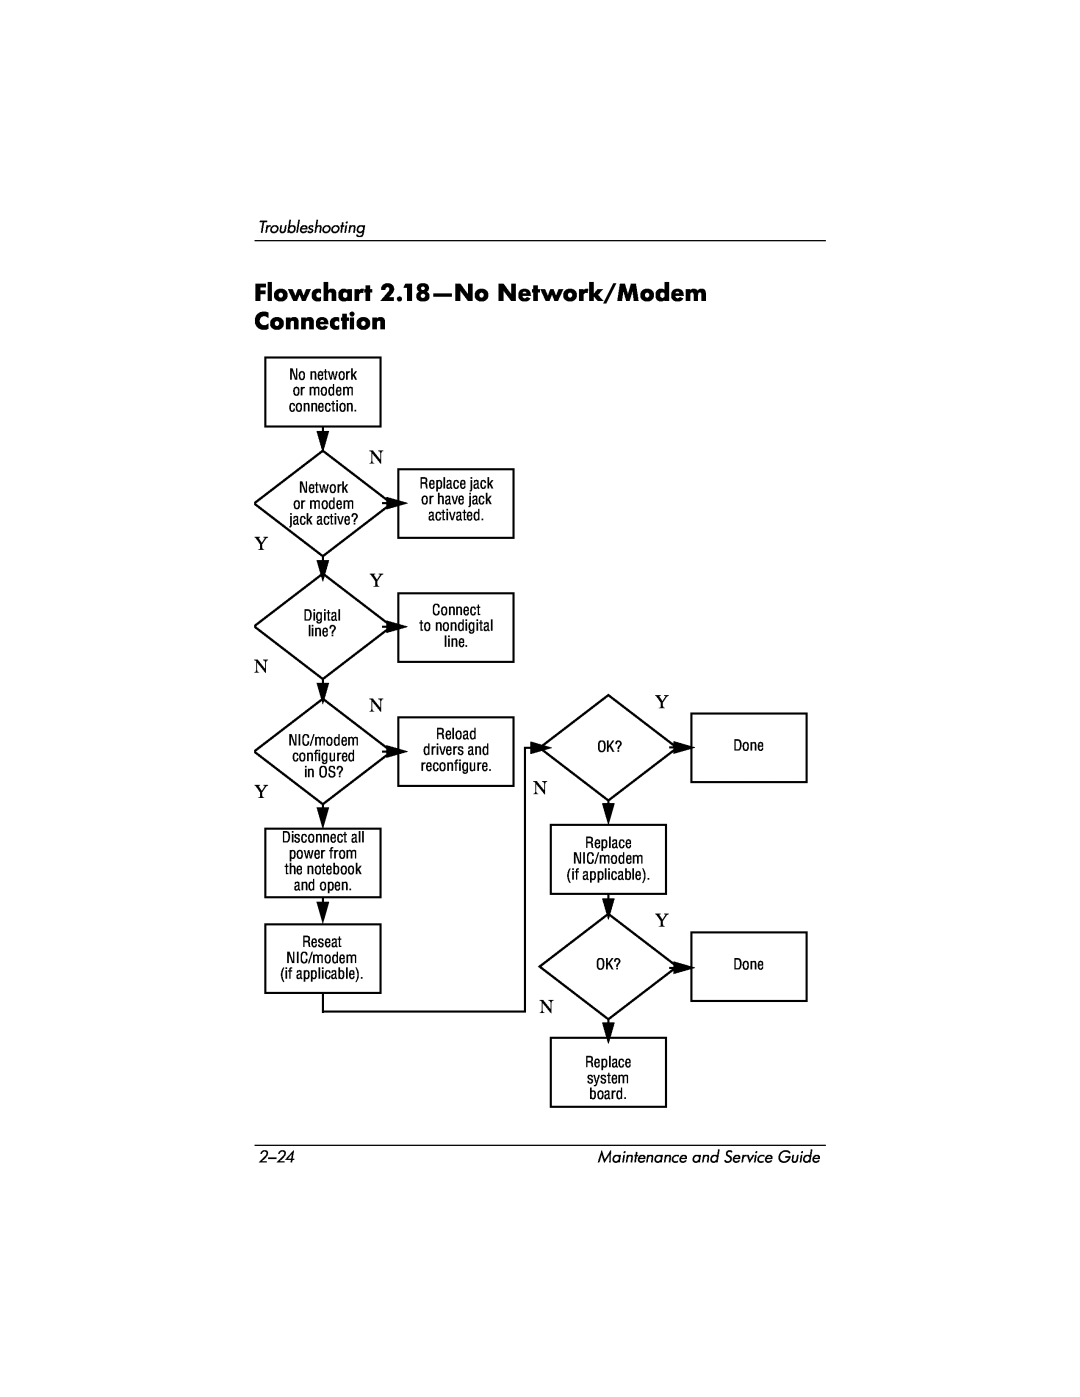 HP NX9020, NX9040, NX9030 Flowchart 2.18-No Network/Modem Connection, Troubleshooting, 2-24, Maintenance and Service Guide 